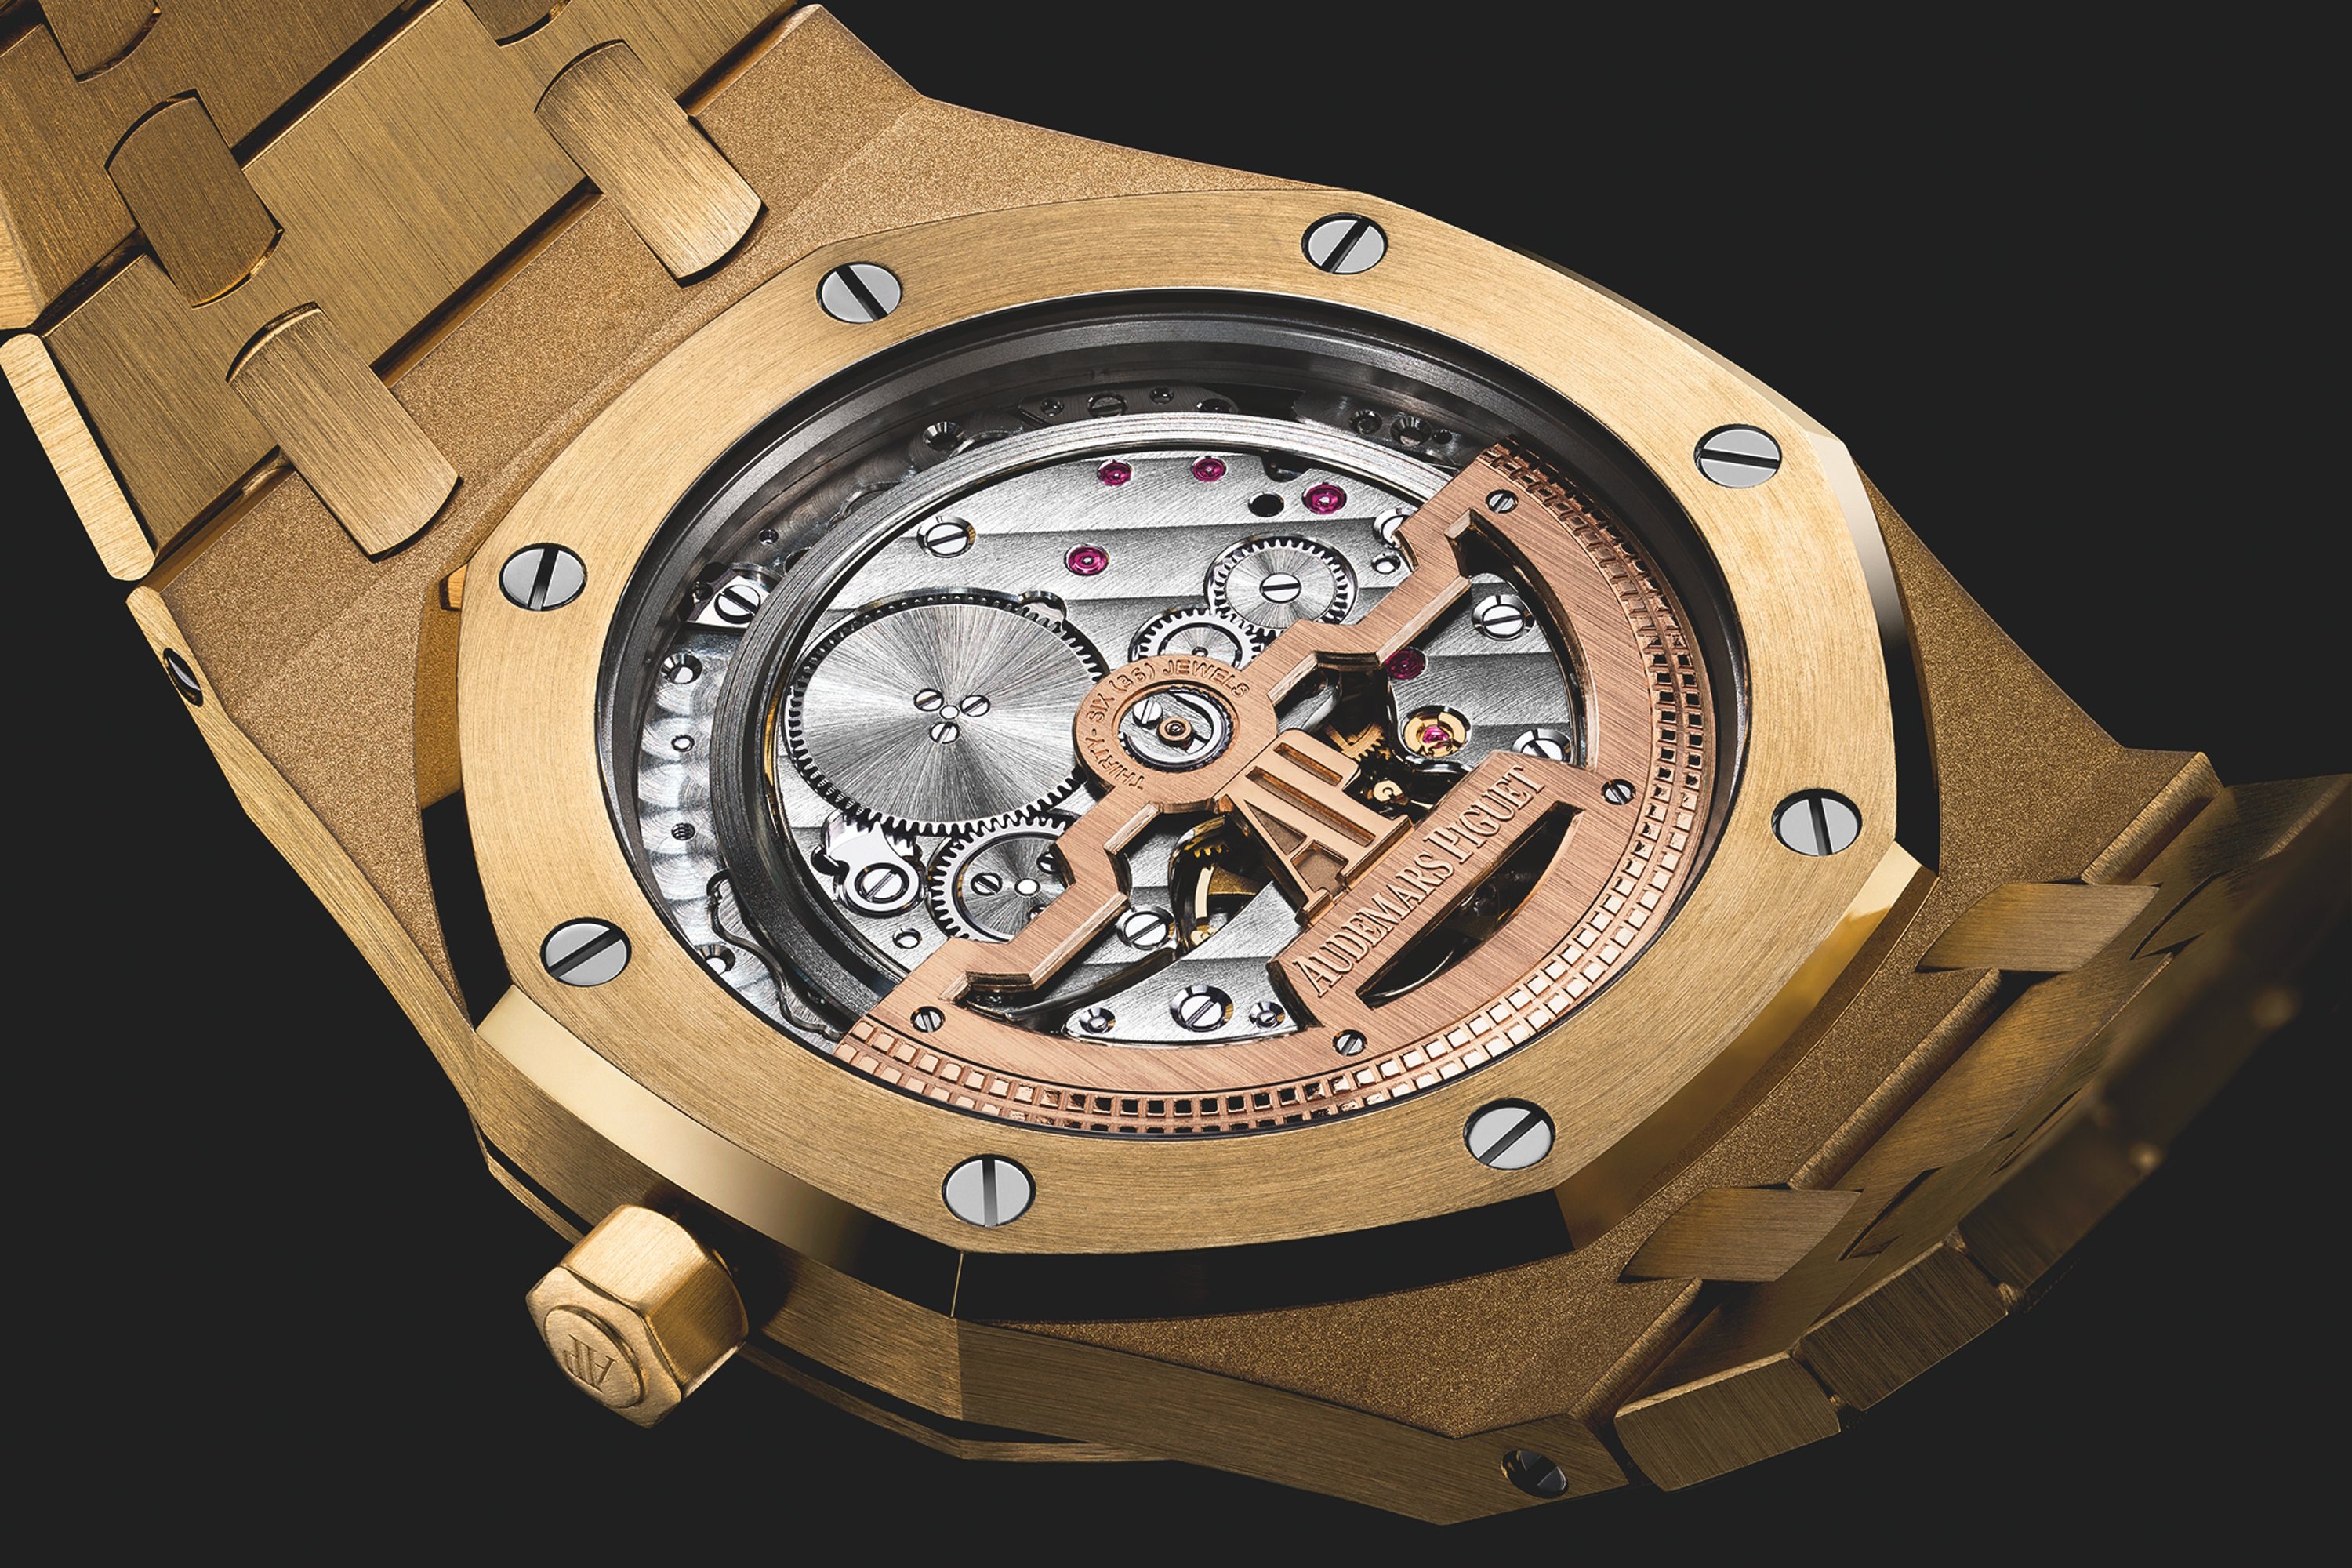 Audemars Piguet's Royal Oak Ultra-Thin Jumbo Is Now Available in Yellow Gold Watches Timepieces Geneva ref. 15202